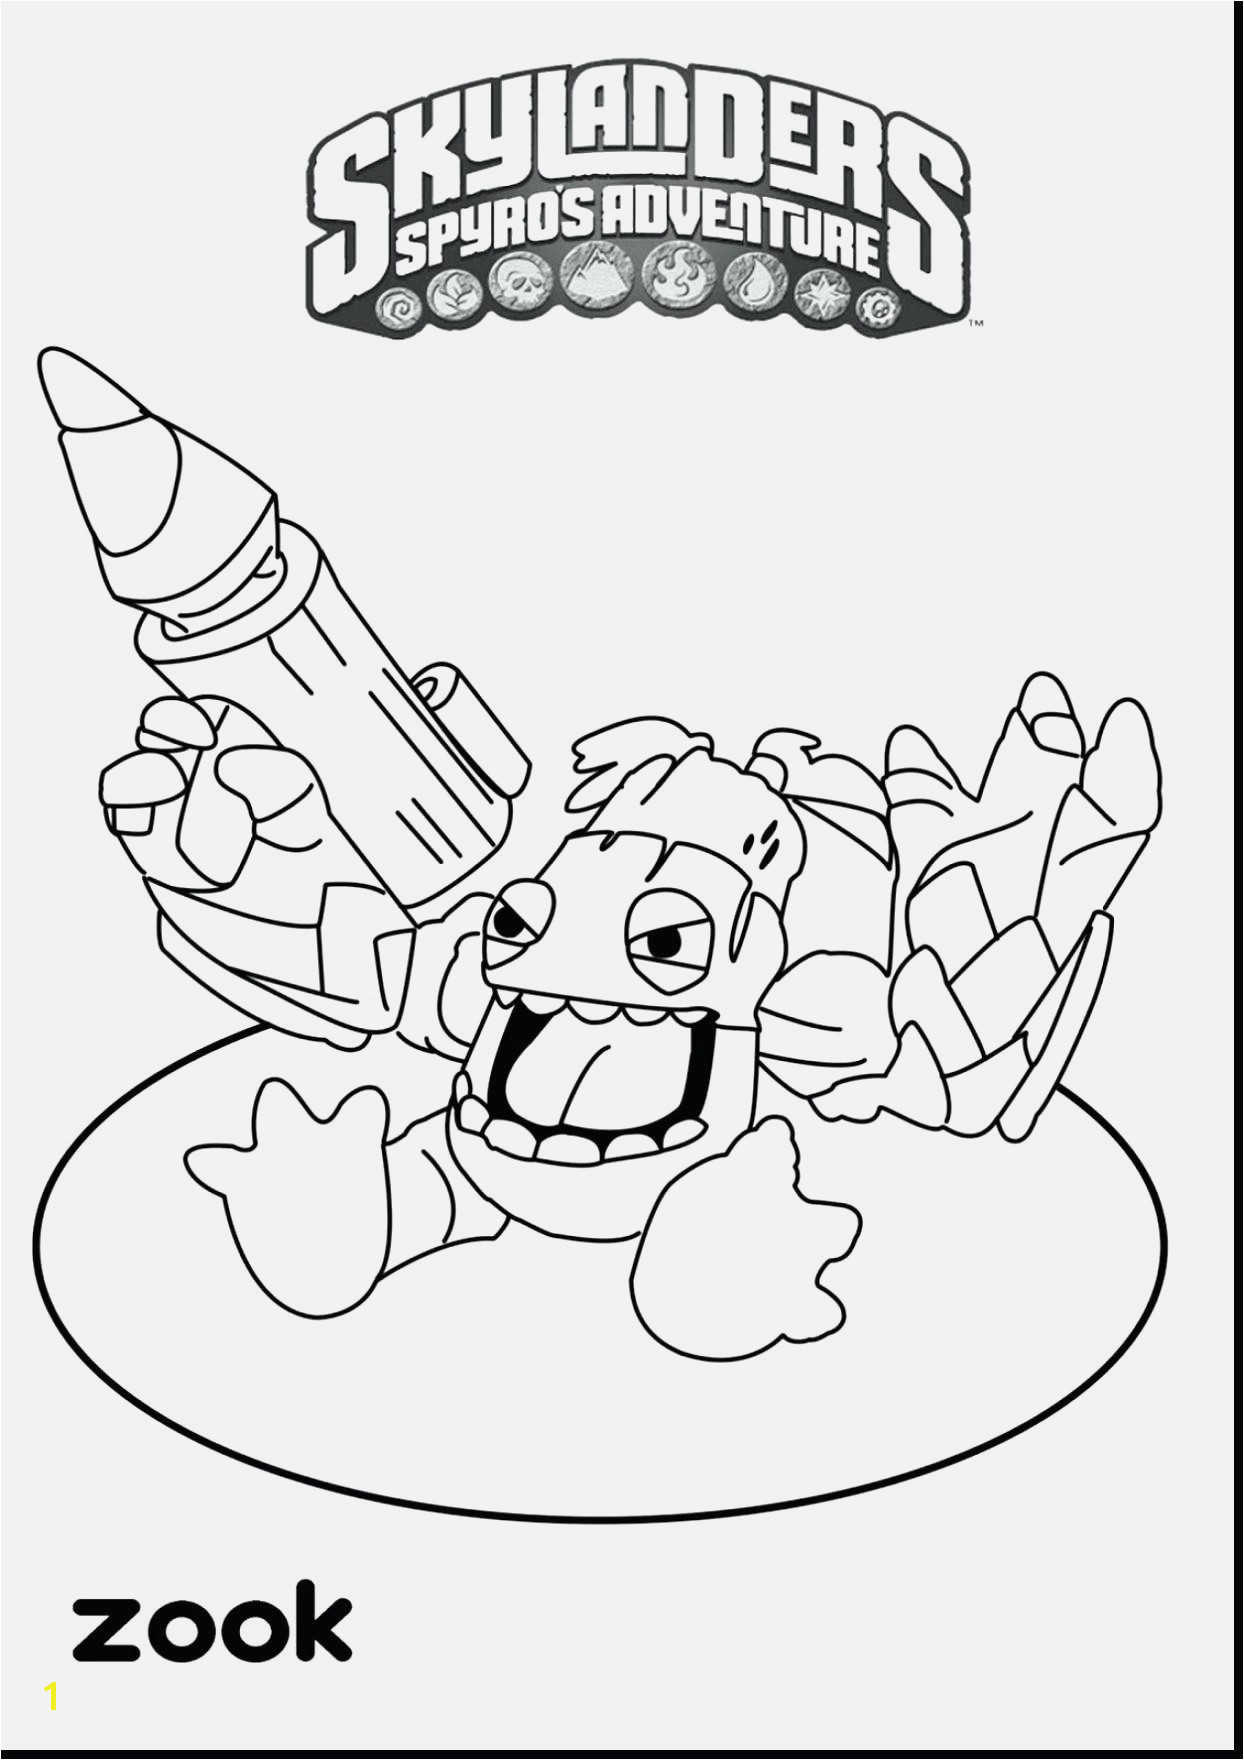 Dark Angel Coloring Pages Friendship Coloring Pages Elegant Best Coloring Pages for Girls